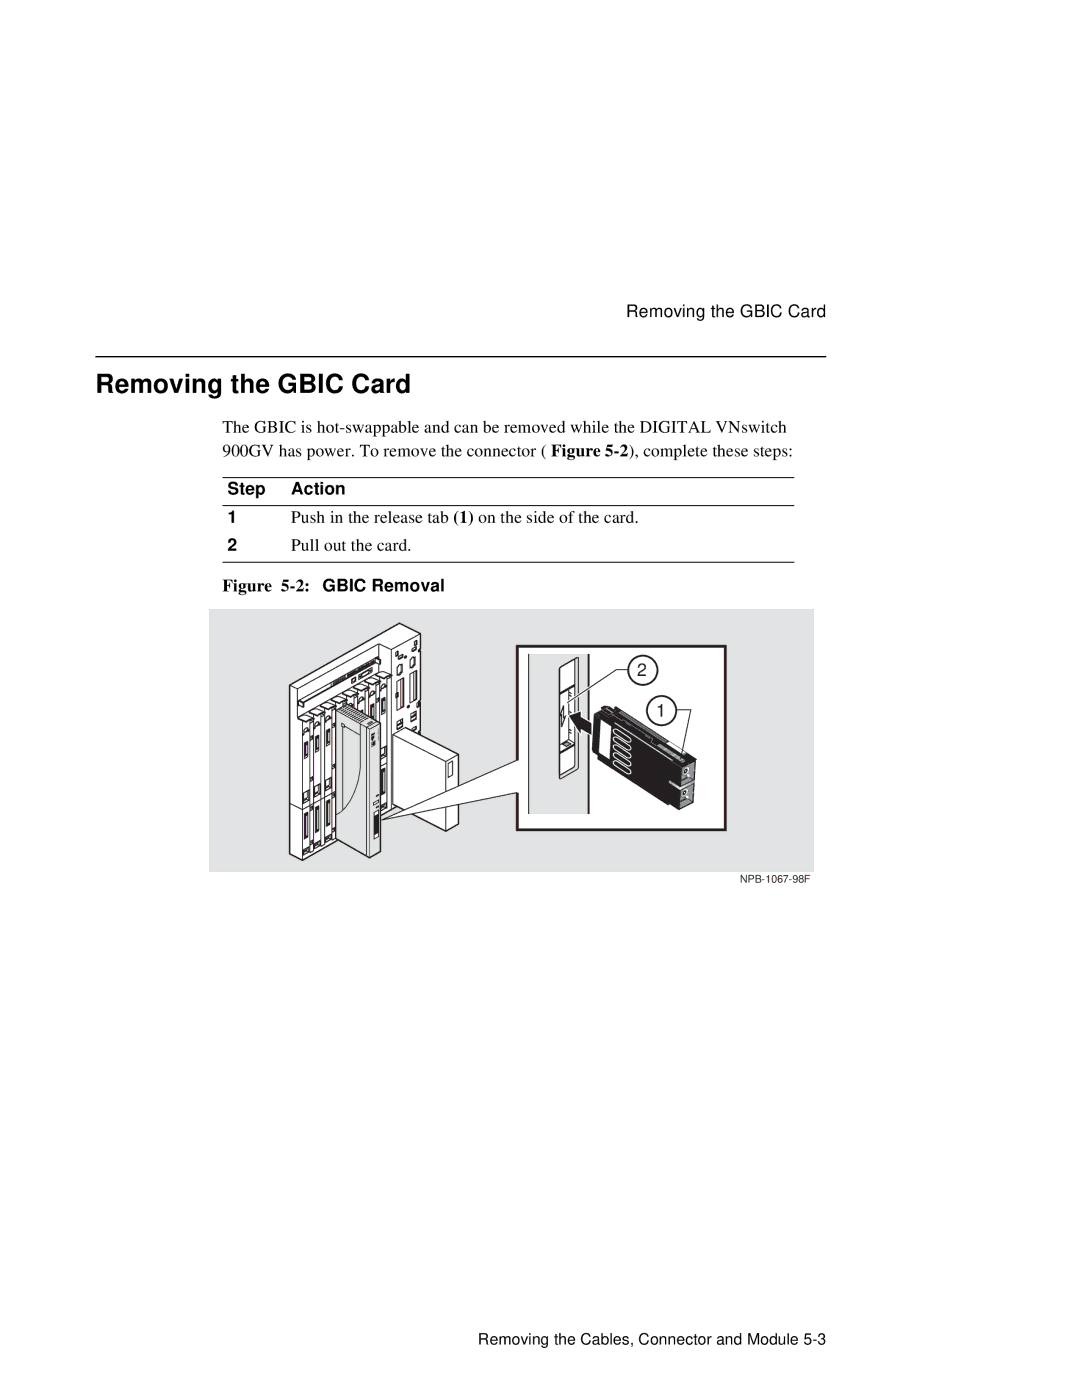 Network Technologies 900GV manual Removing the Gbic Card, Gbic Removal 